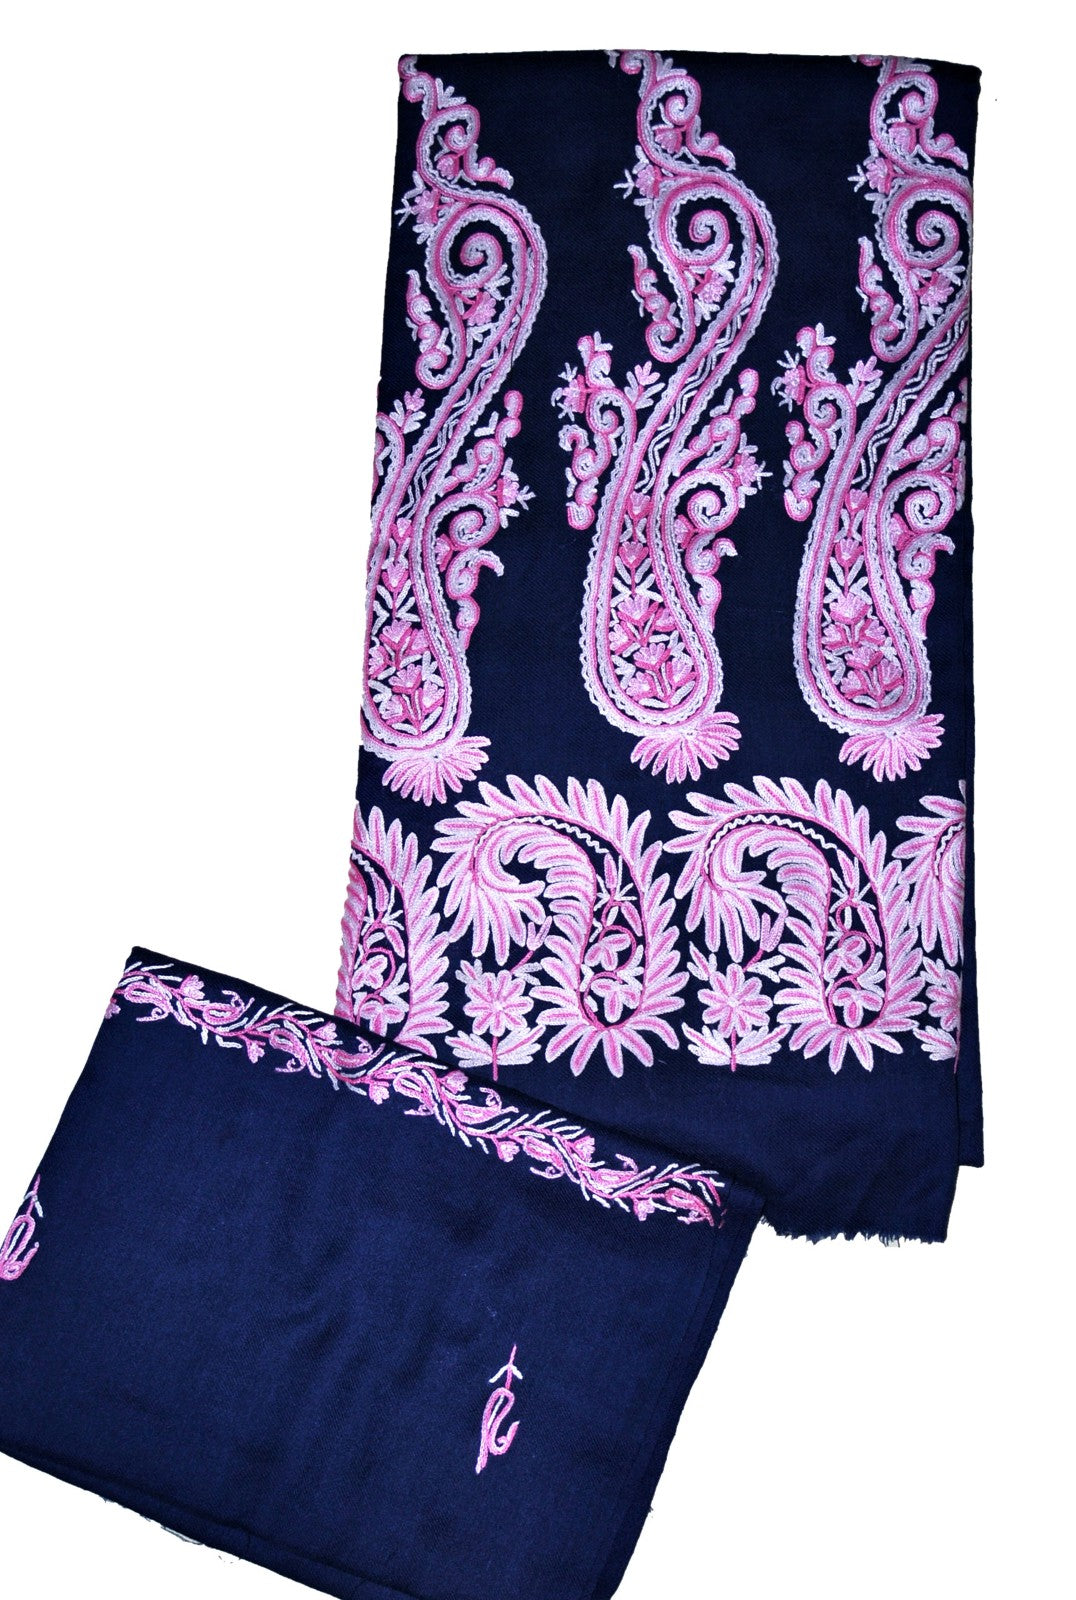 Woolen Salwar Kameez Suit Unstitched Fabric and Shawl Navy, Pink and White Embroidery #FS-423